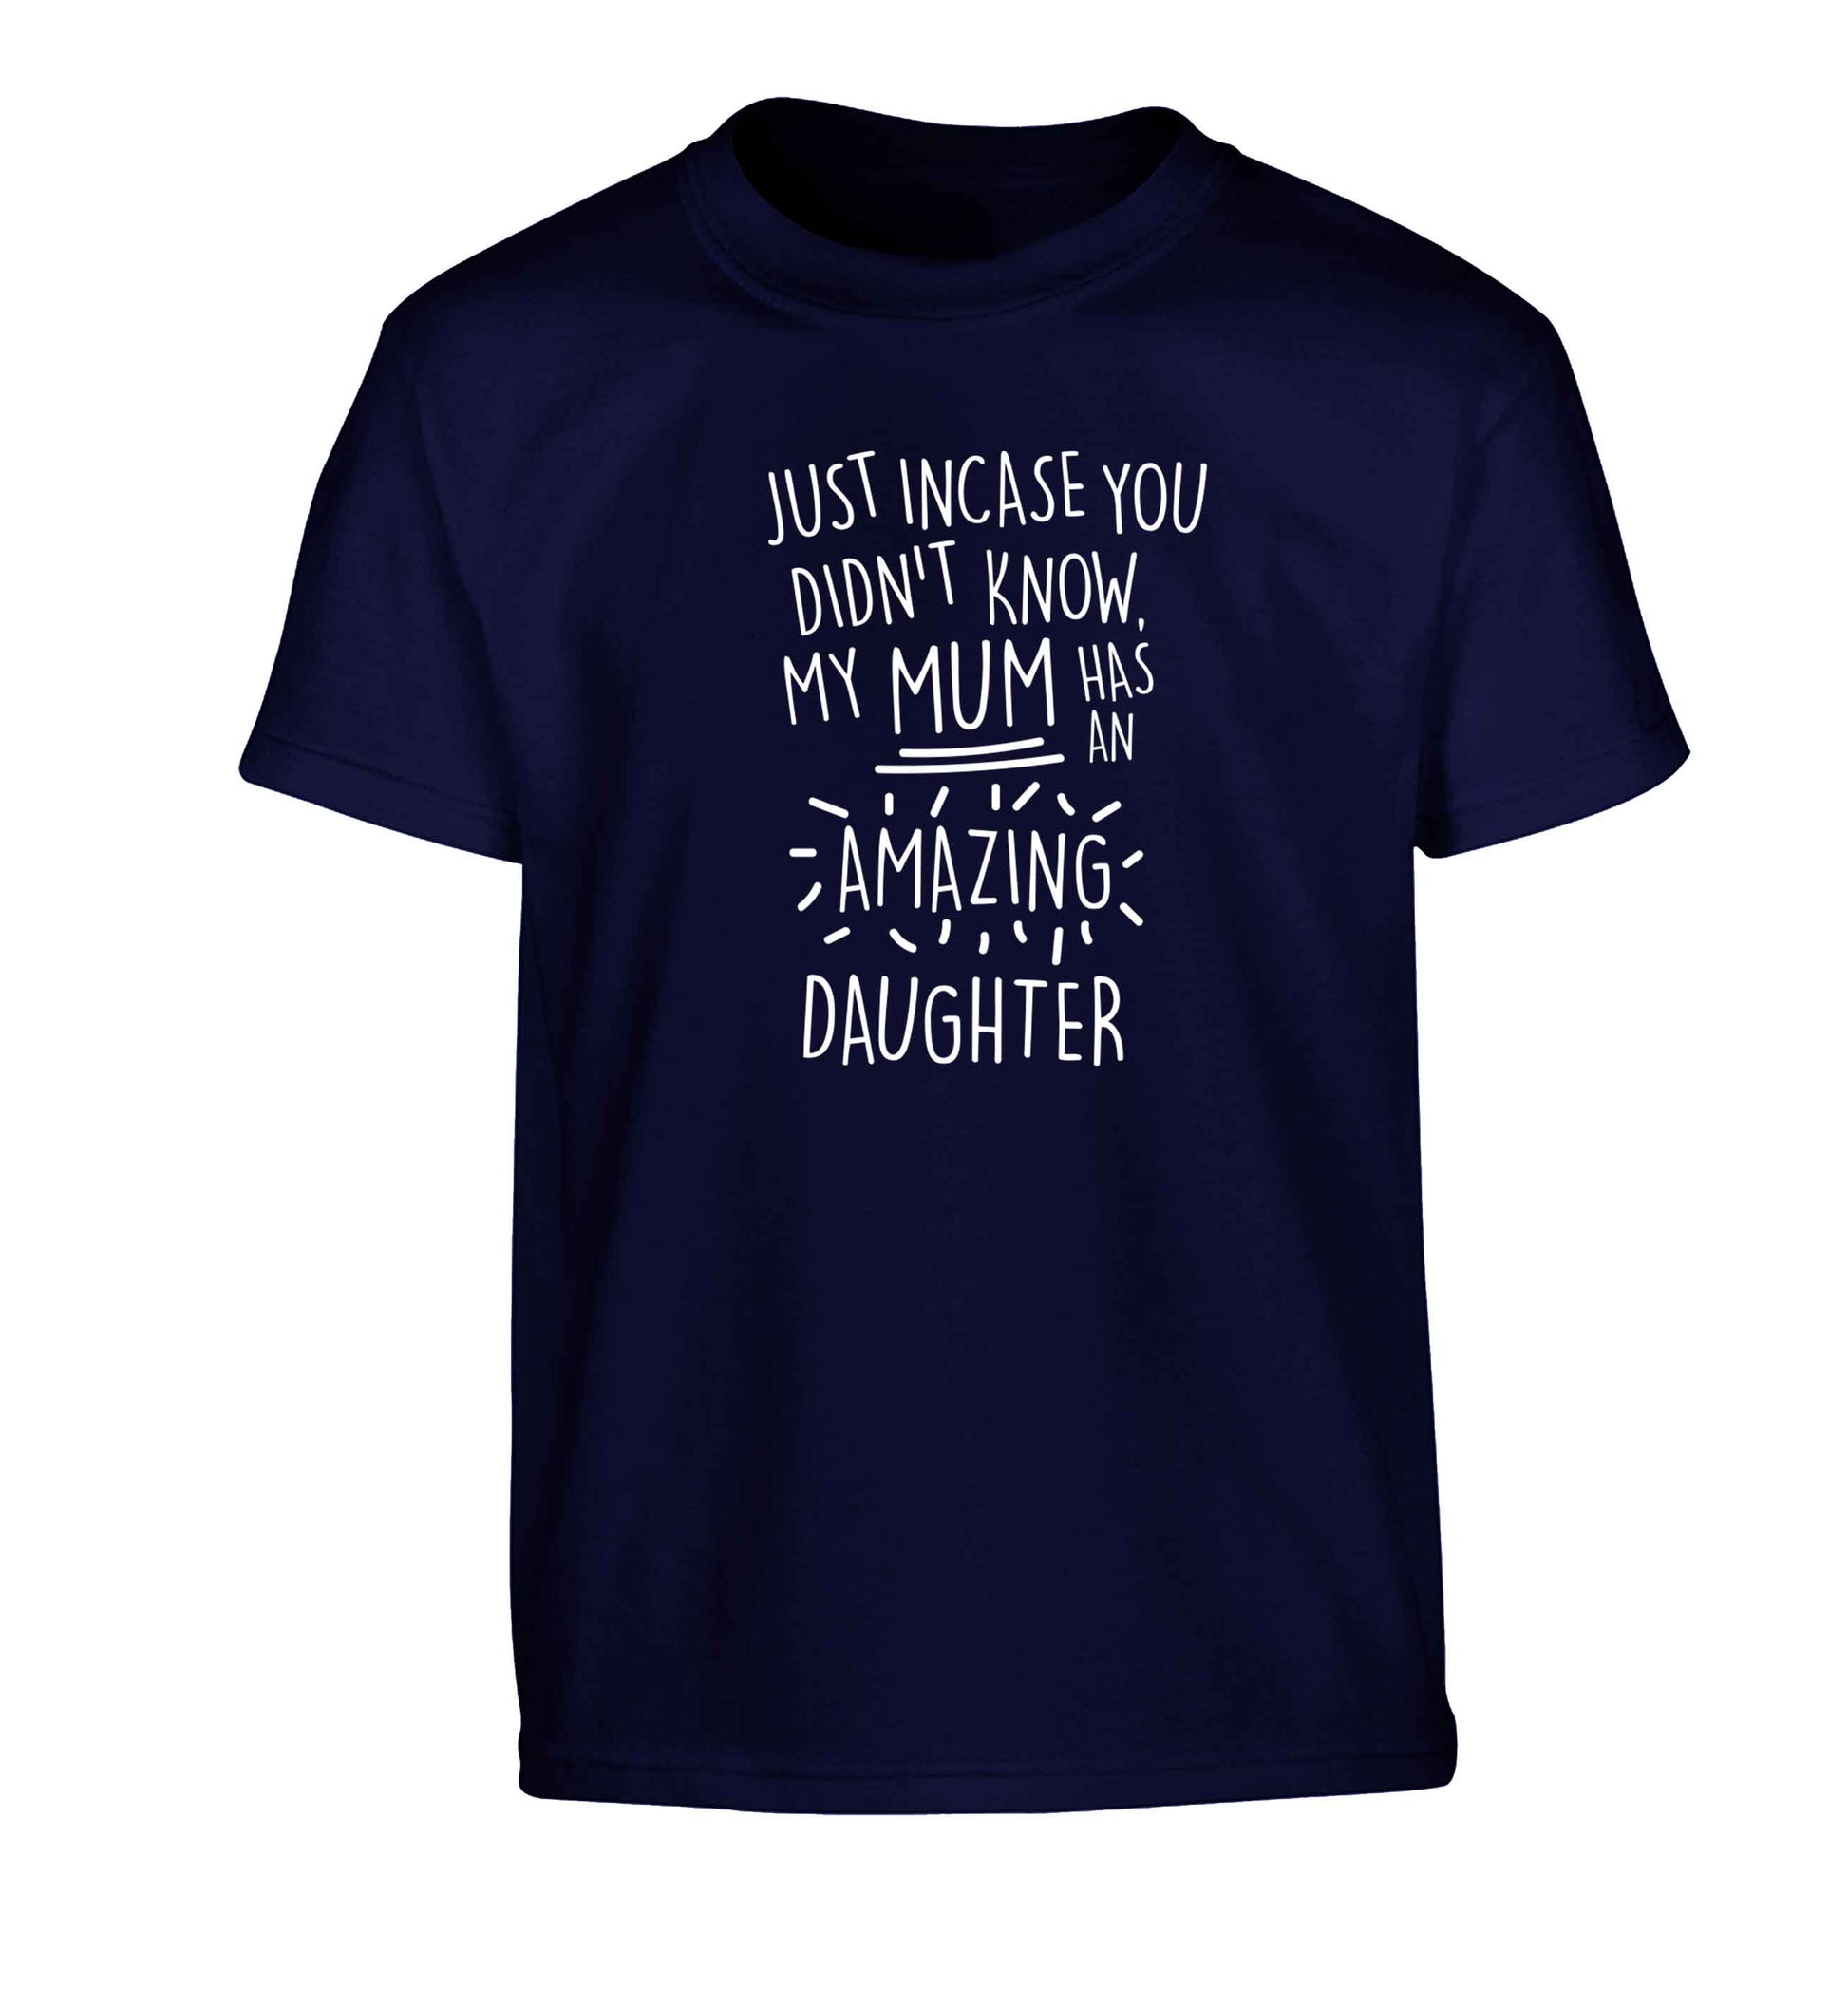 Just incase you didn't know my mum has an amazing daughter Children's navy Tshirt 12-13 Years